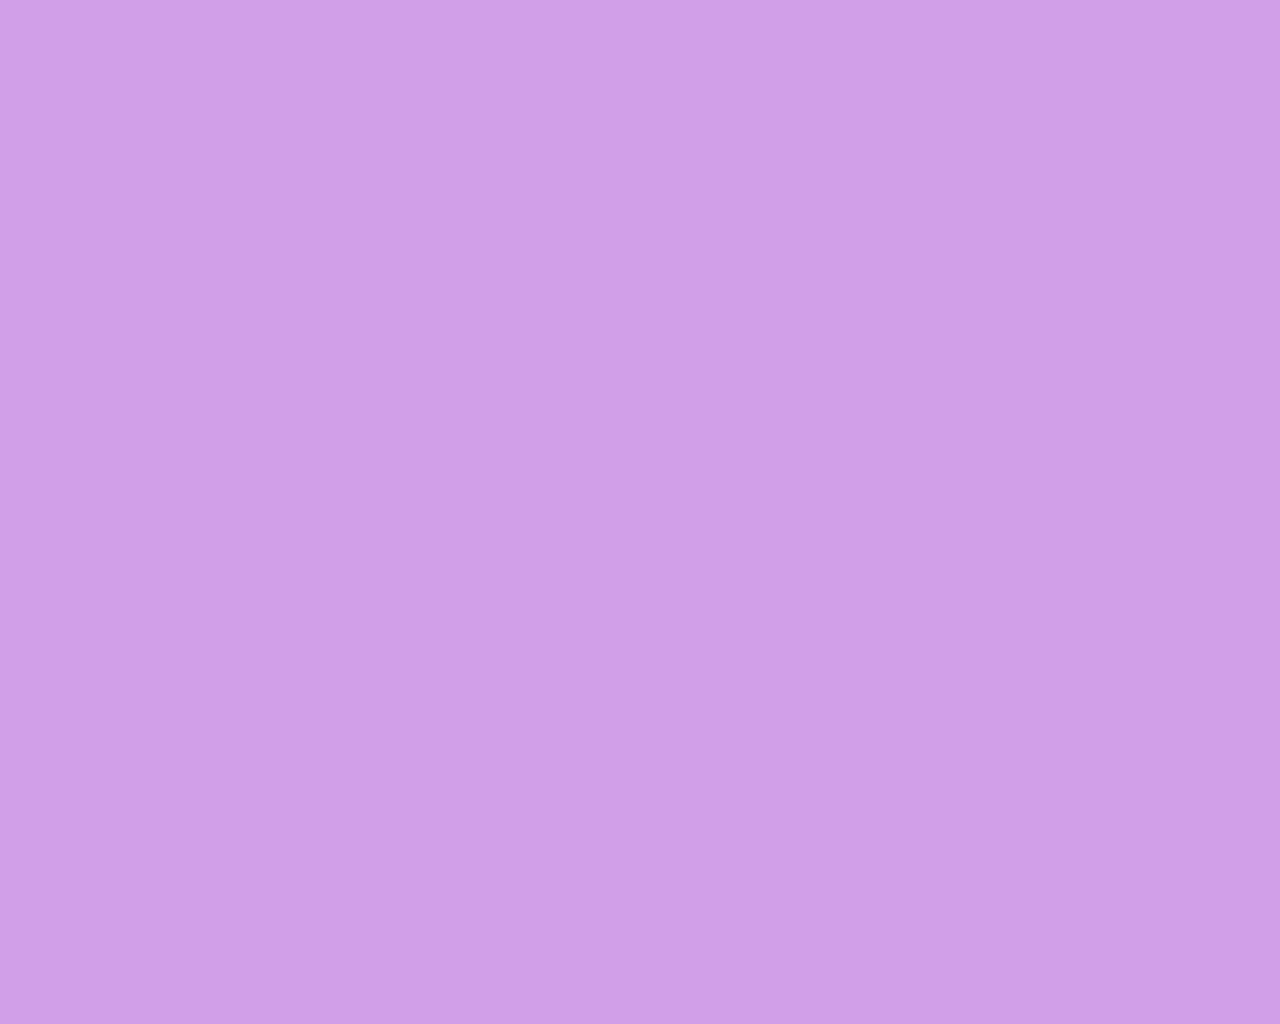 1280x1024 Bright Ube Solid Color Background